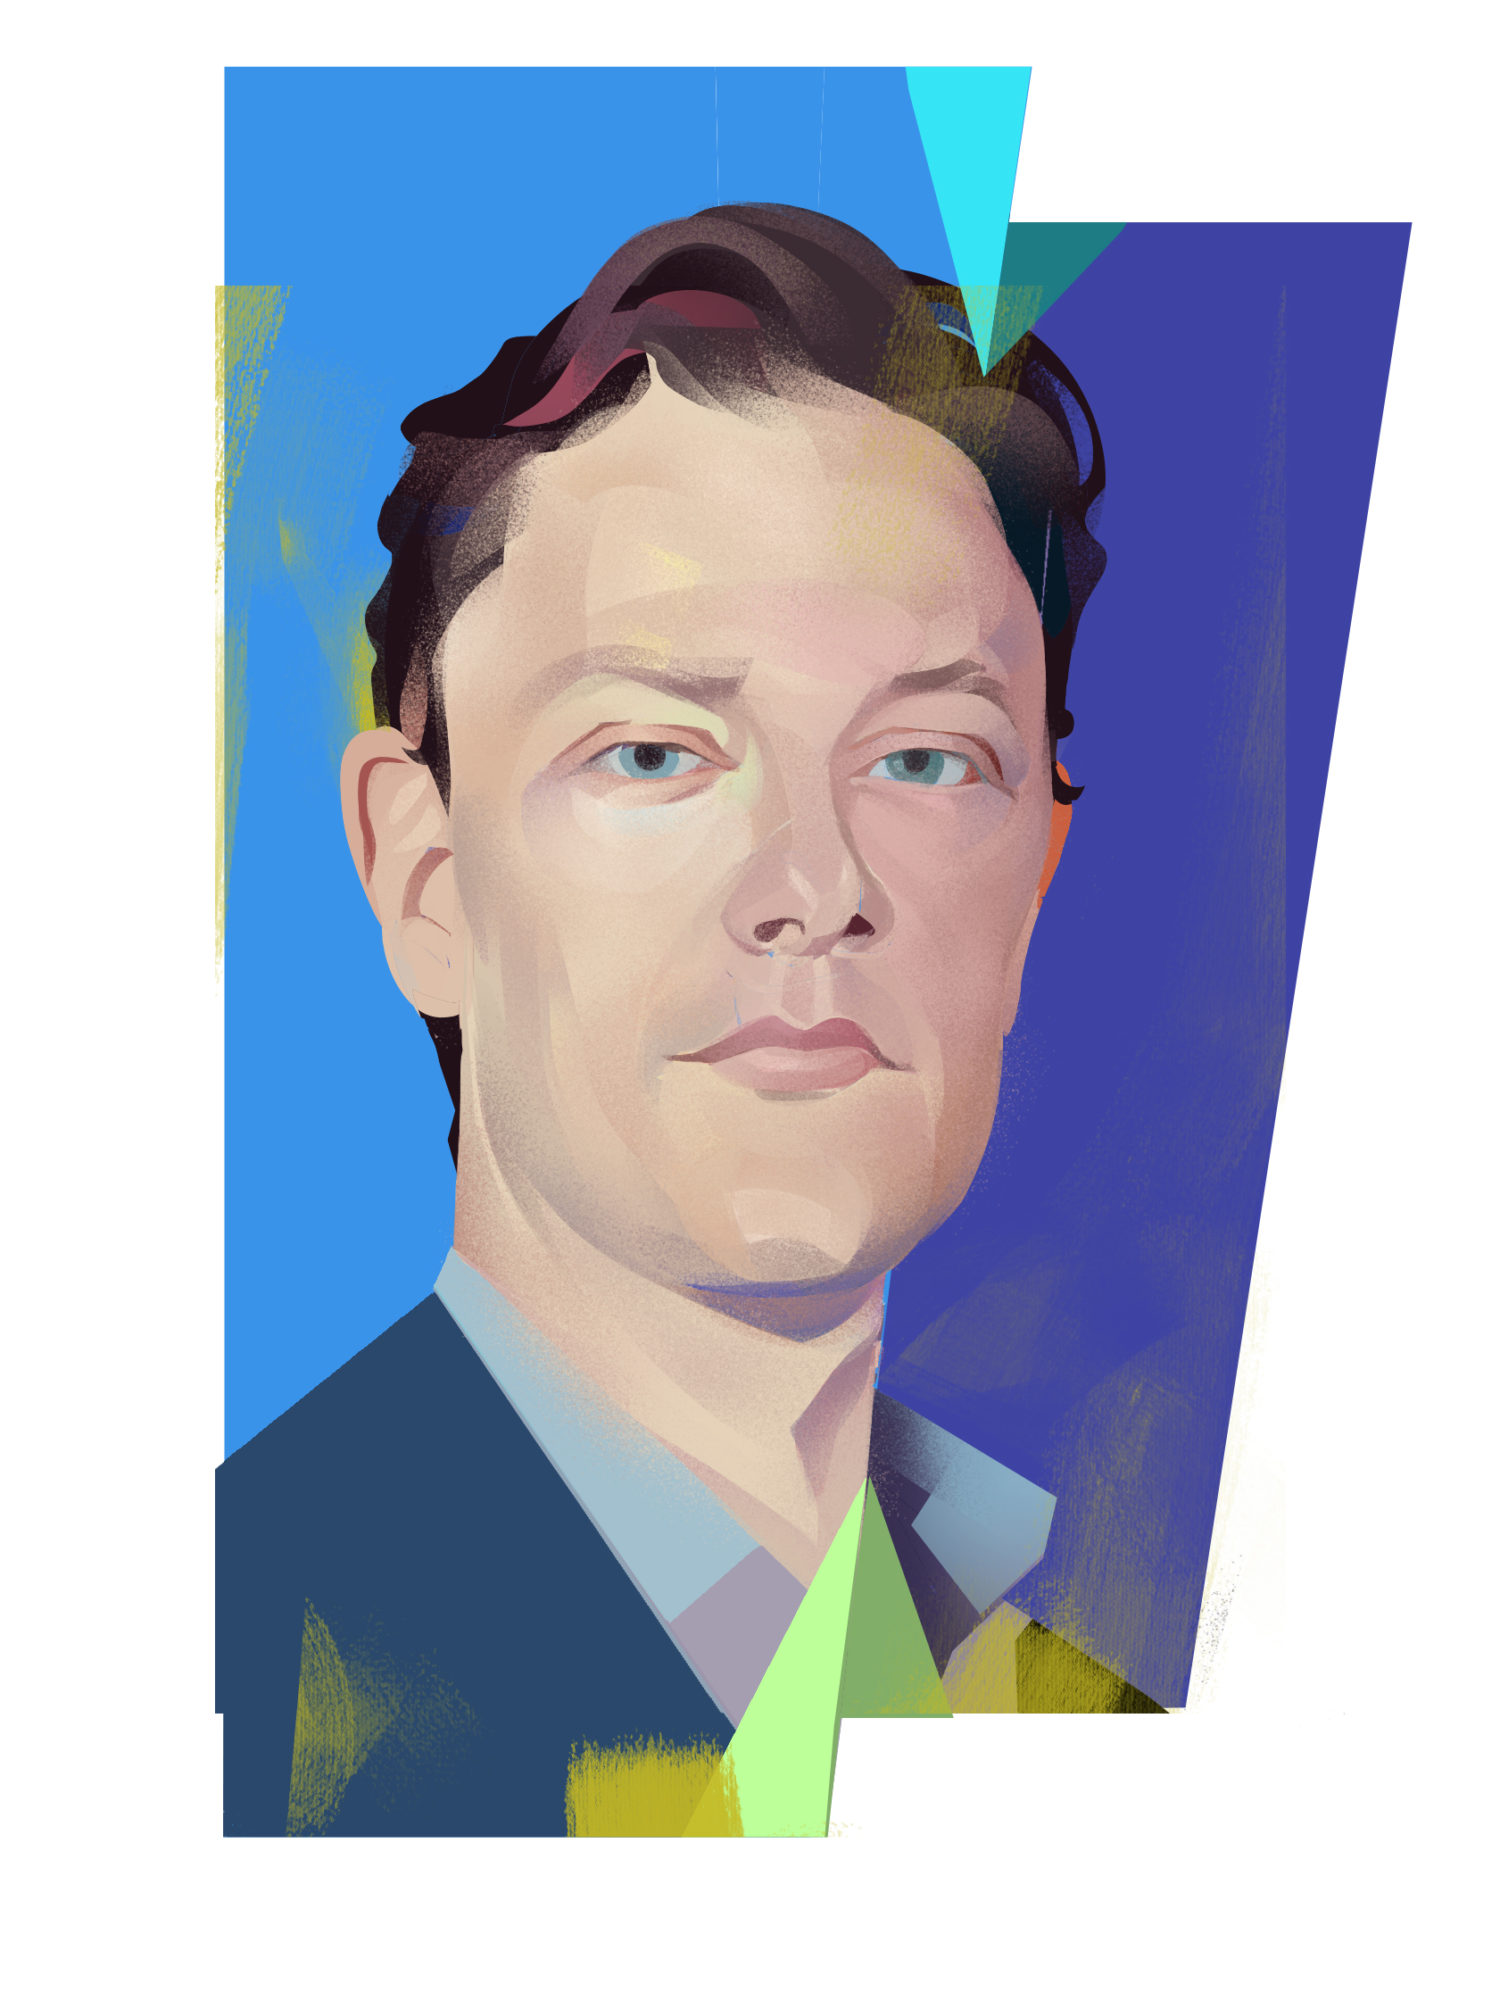 Illustration Dr. Chris McIntosh with blue, purple and green background